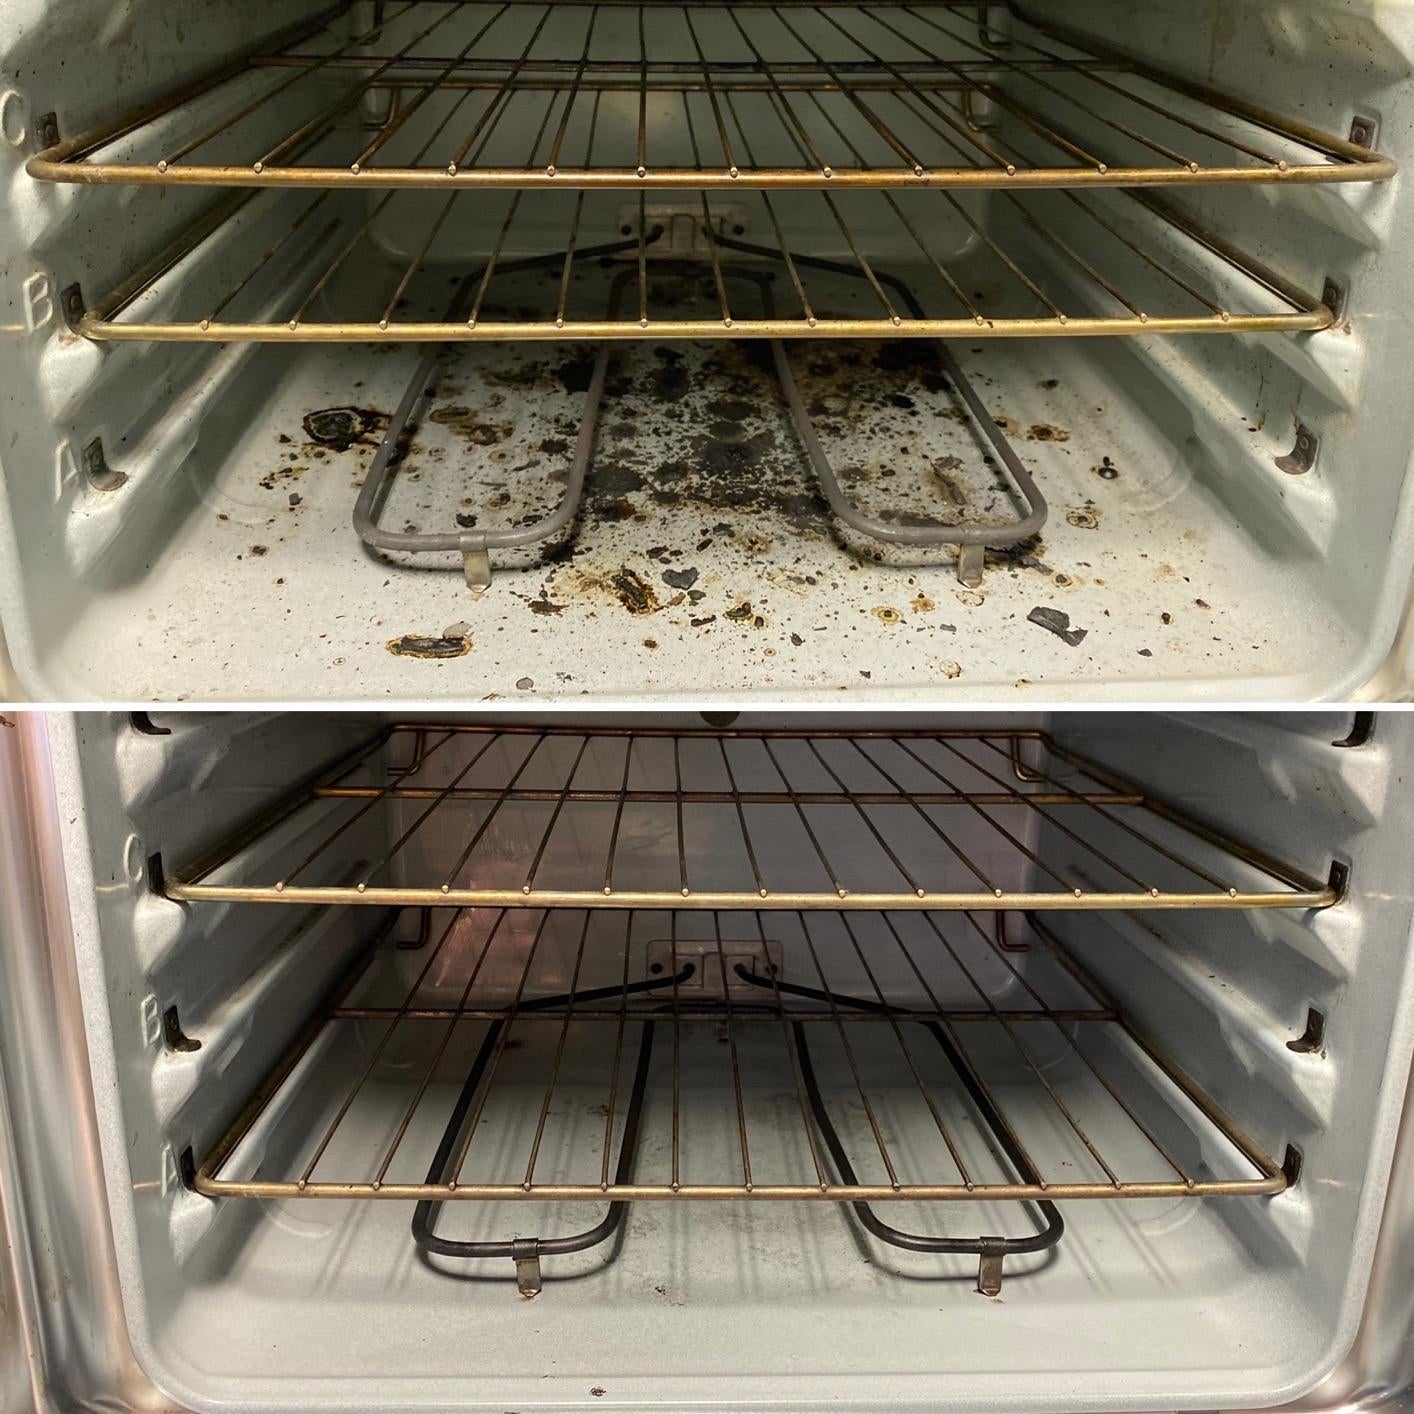 Reviewer's oven before and after using Oven-Off